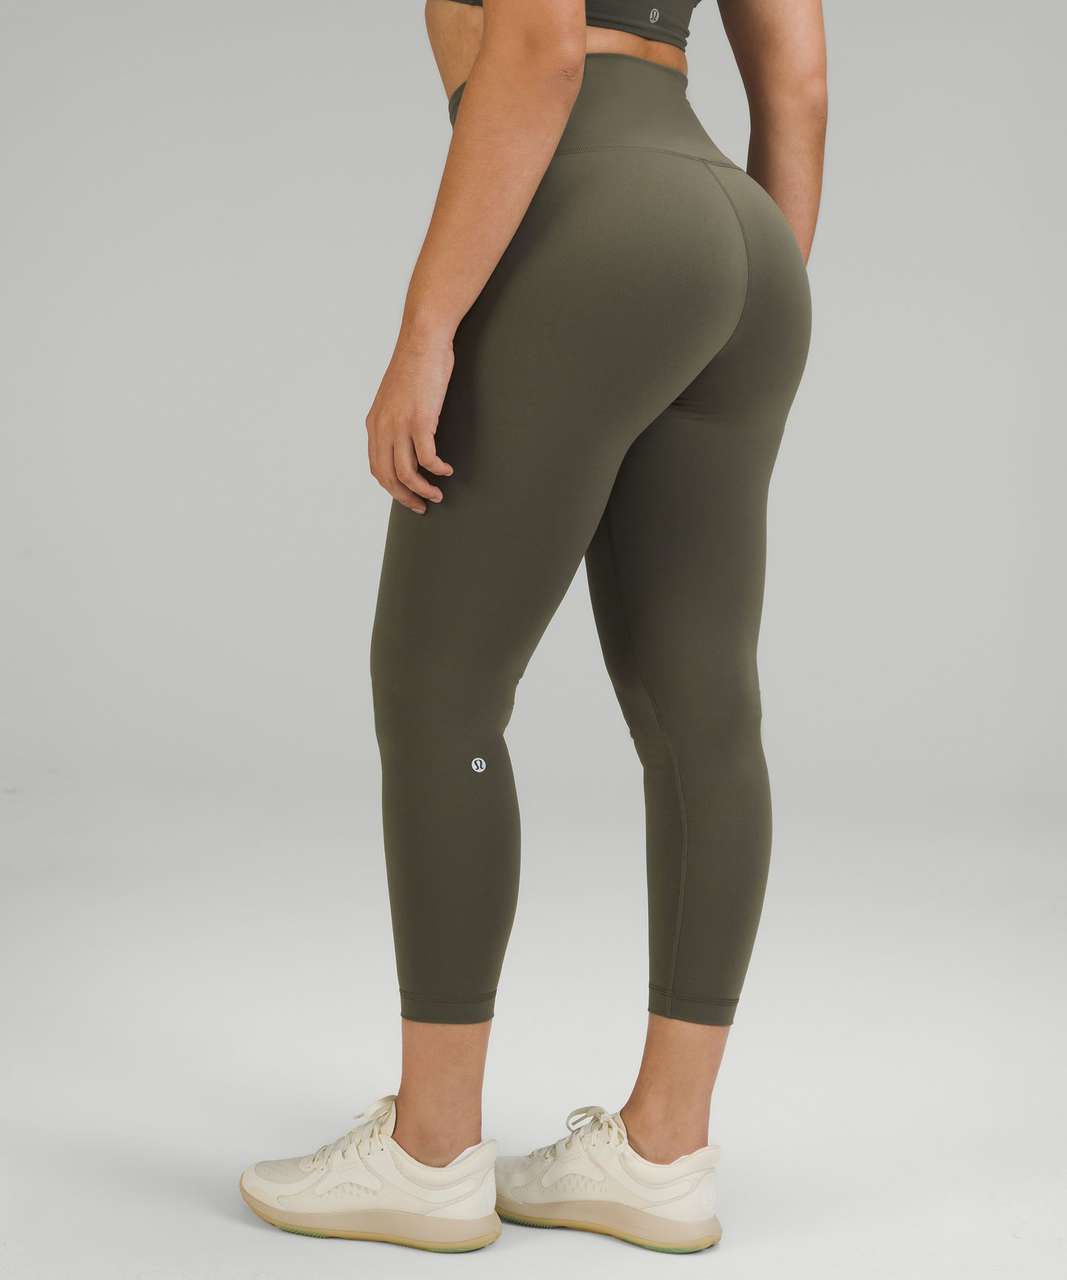 Lululemon Wunder Train Contour Fit High-Rise Tight 25" - Army Green